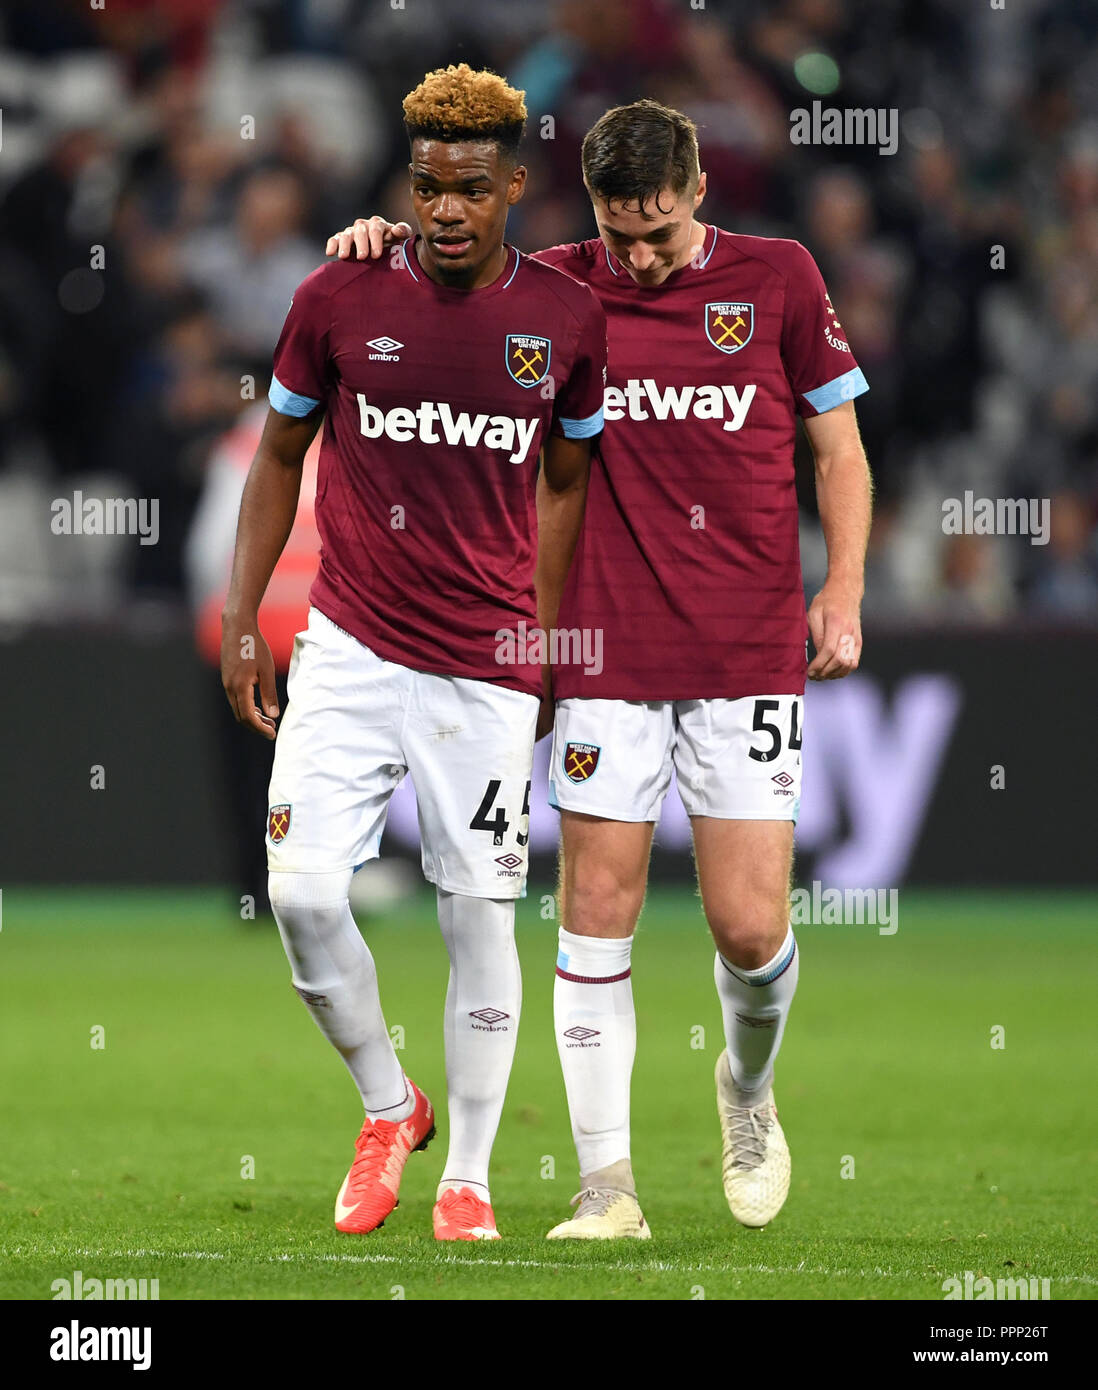 West Ham United's Grady Diangana (left) and Joe Powell  during the Carabao Cup, Third Round match at London Stadium. PRESS ASSOCIATION Photo. Picture date: Wednesday September 26, 2018. See PA story SOCCER West Ham. Photo credit should read: Joe Giddens/PA Wire. RESTRICTIONS: EDITORIAL USE ONLY No use with unauthorised audio, video, data, fixture lists, club/league logos or 'live' services. Online in-match use limited to 120 images, no video emulation. No use in betting, games or single club/league/player publications. Stock Photo